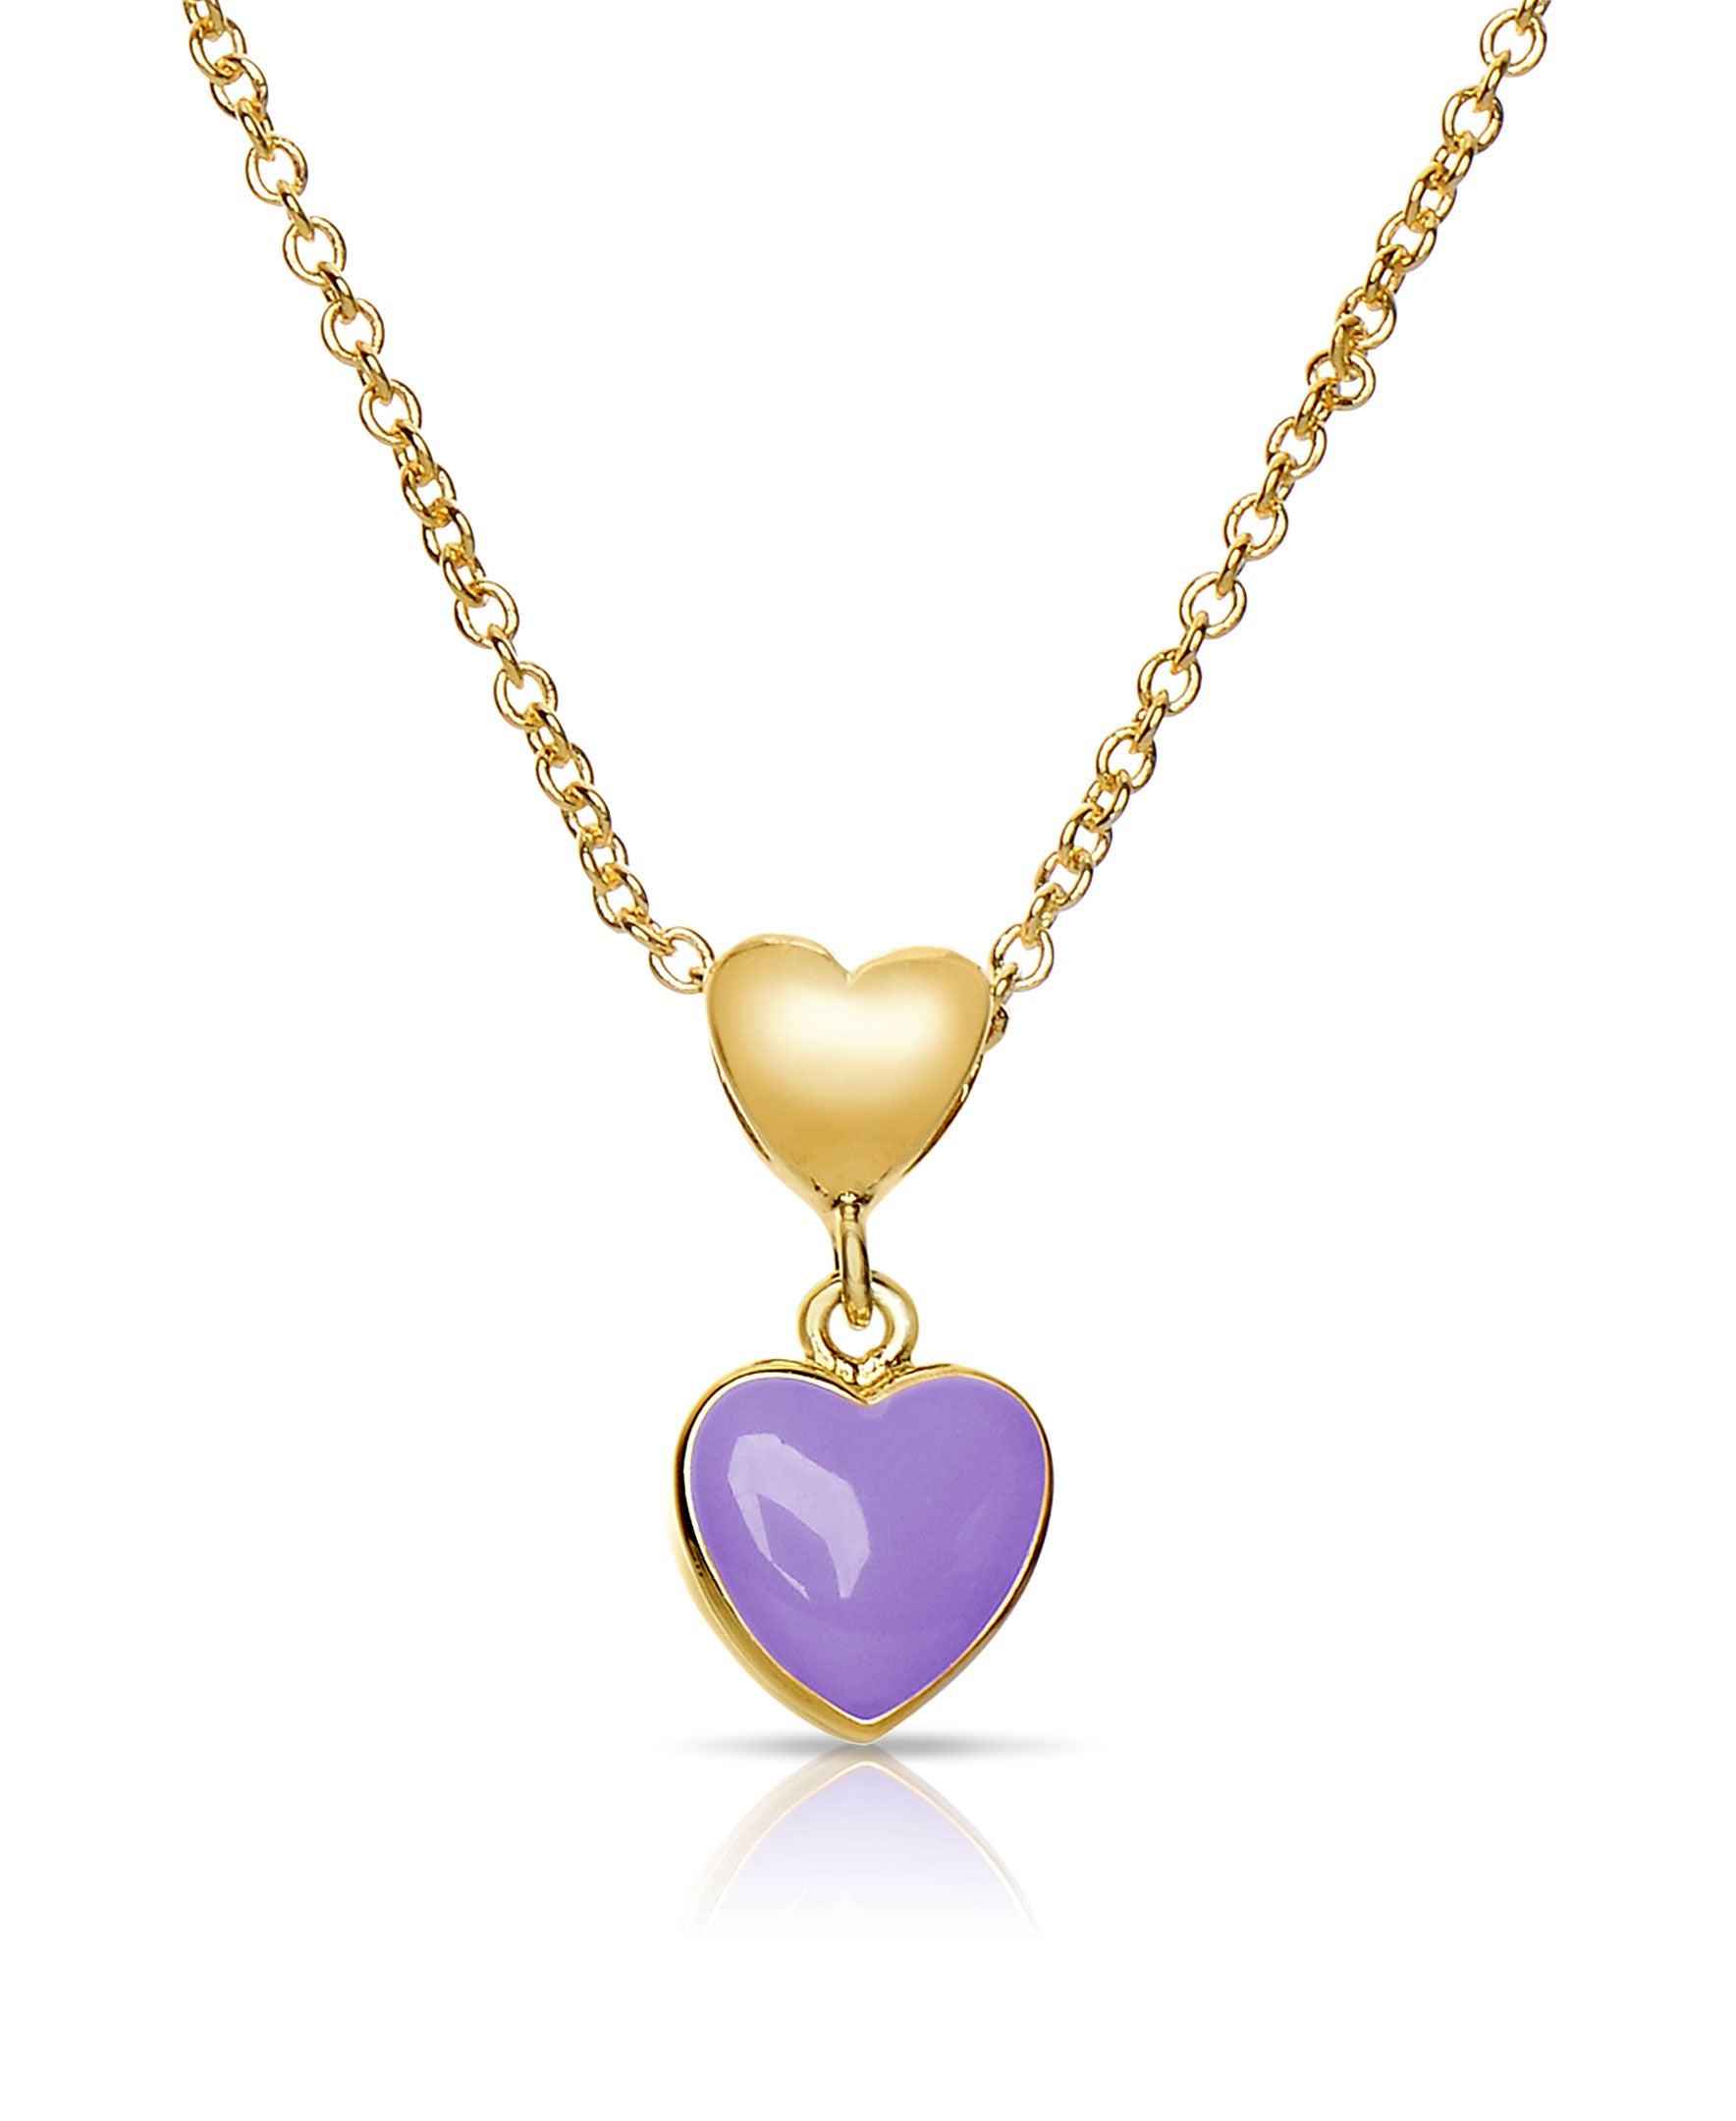 Purple Sapphire Necklace - Pear 0.73 Ct. - 14K Yellow Gold